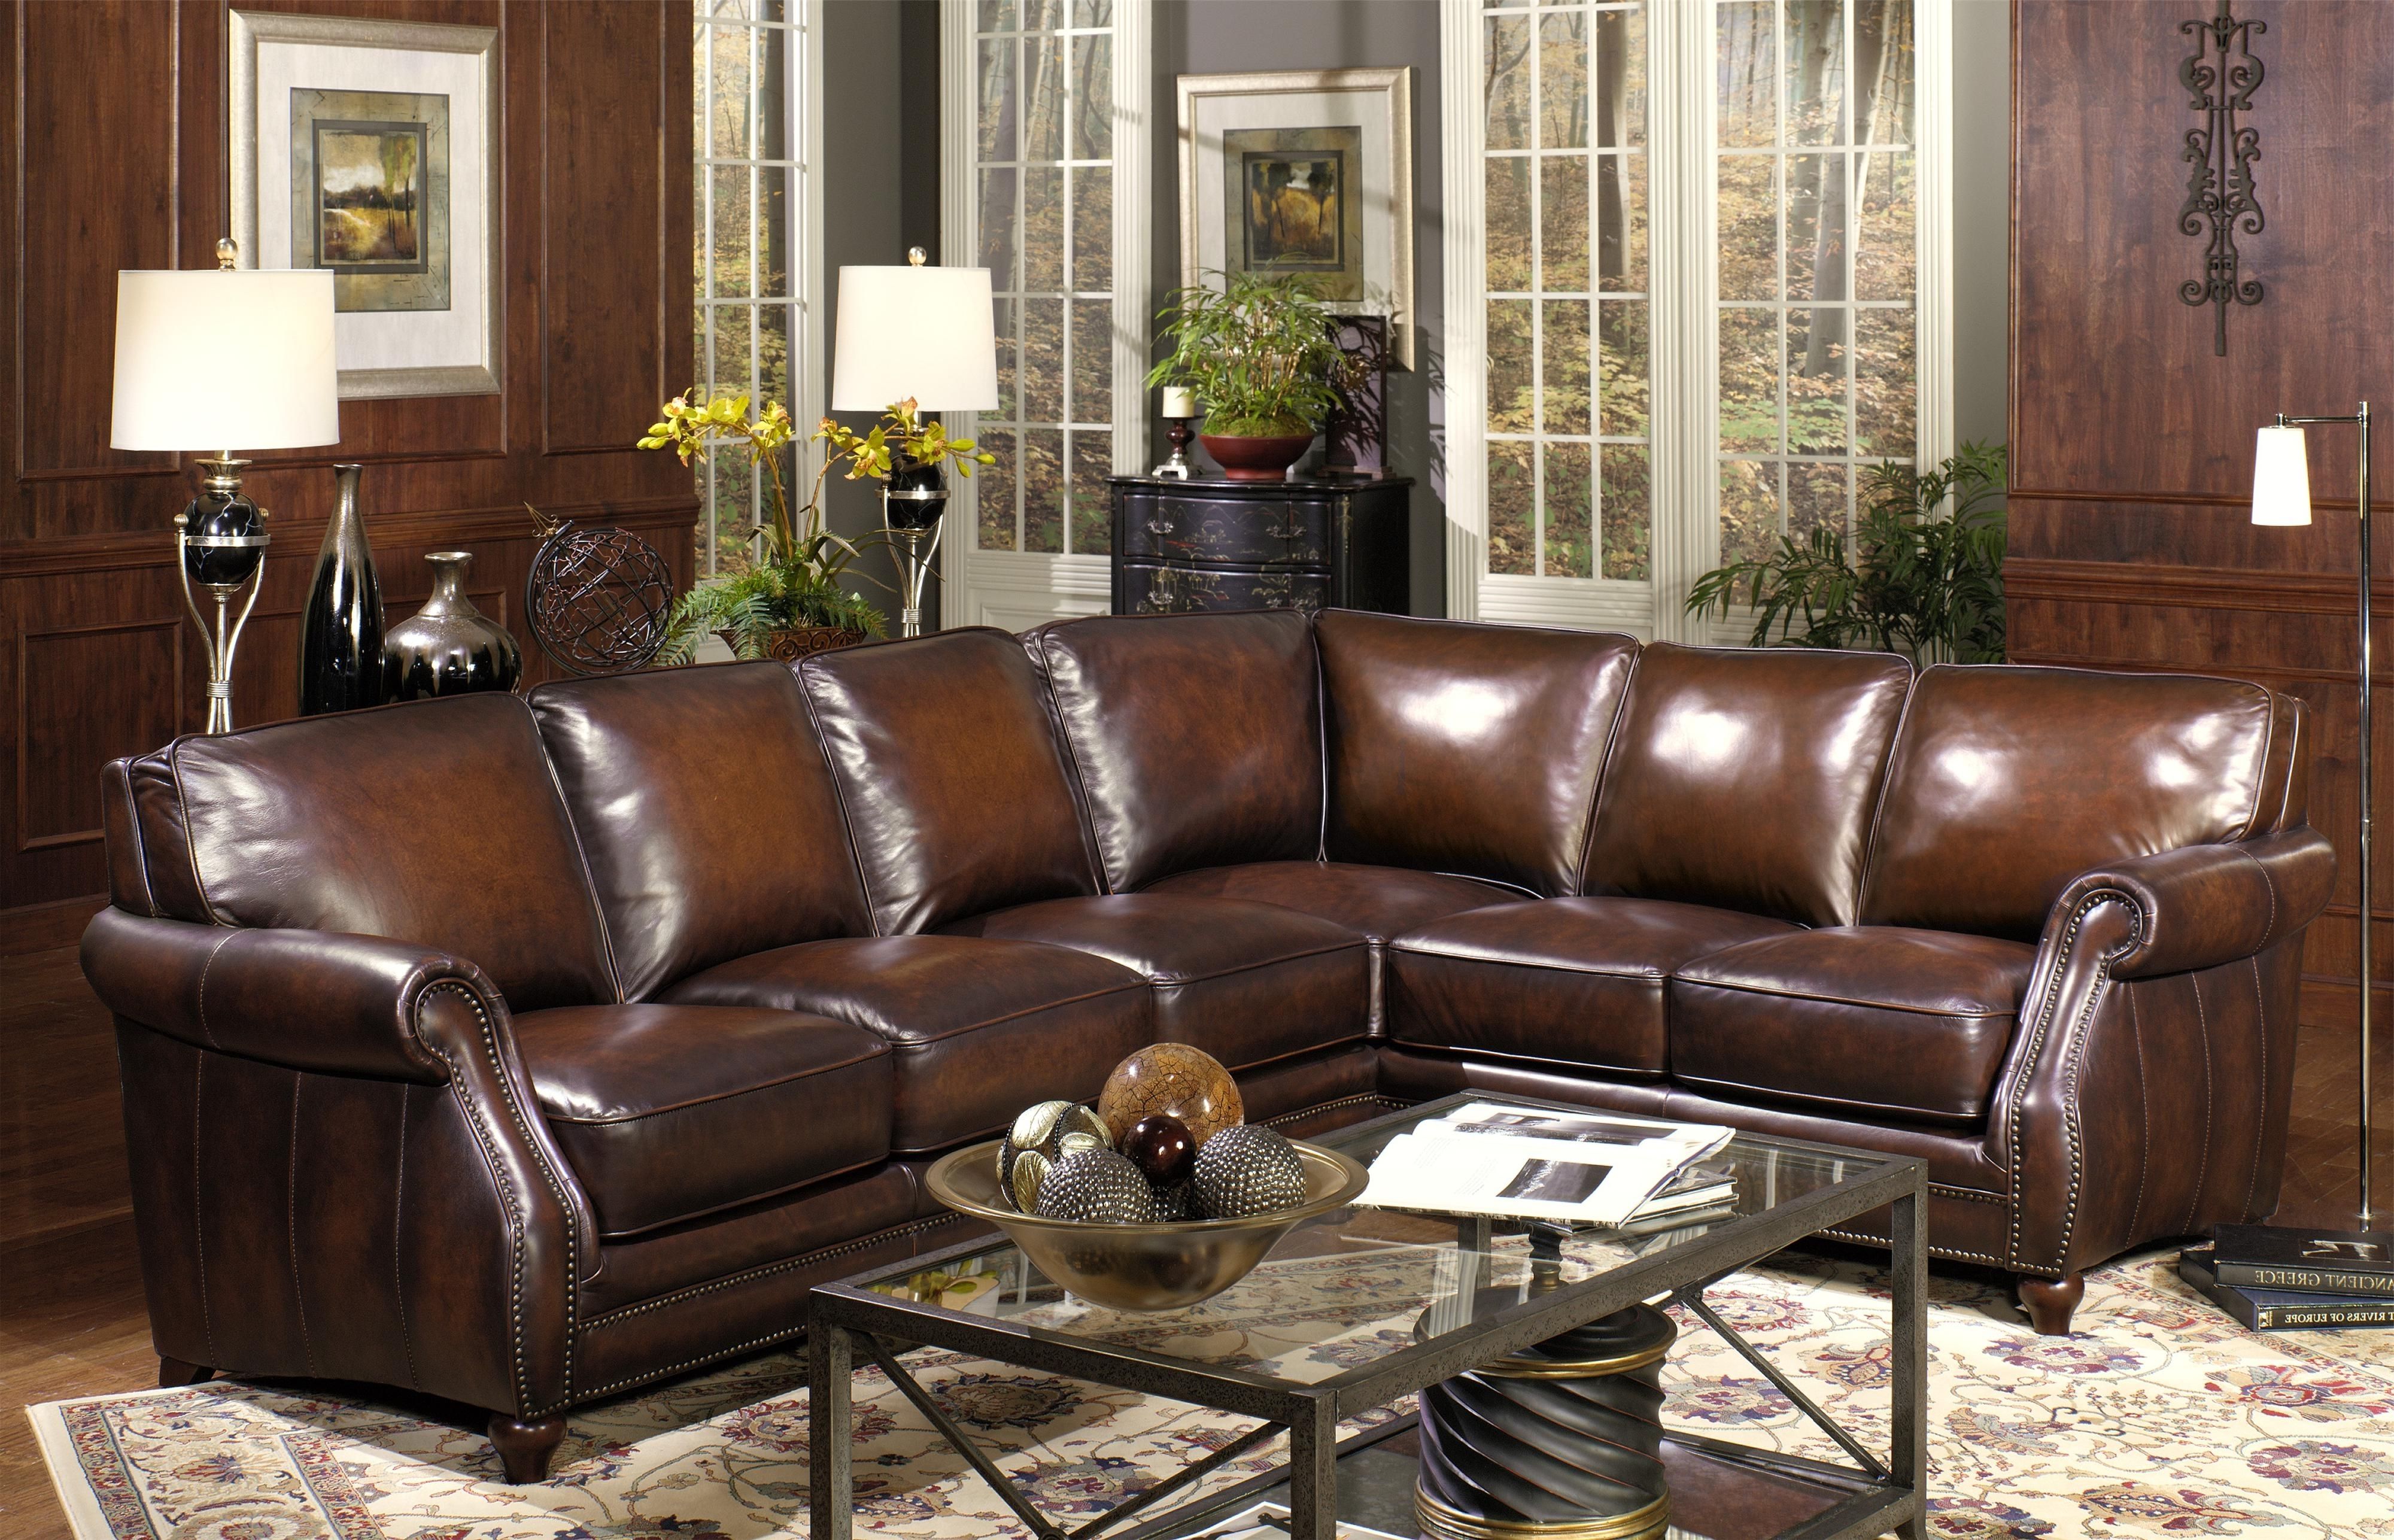 Quality Sectional Sofas Regarding Preferred Sofa : Small Sectional Sofa Contemporary Sectional Sofas Best (View 7 of 20)